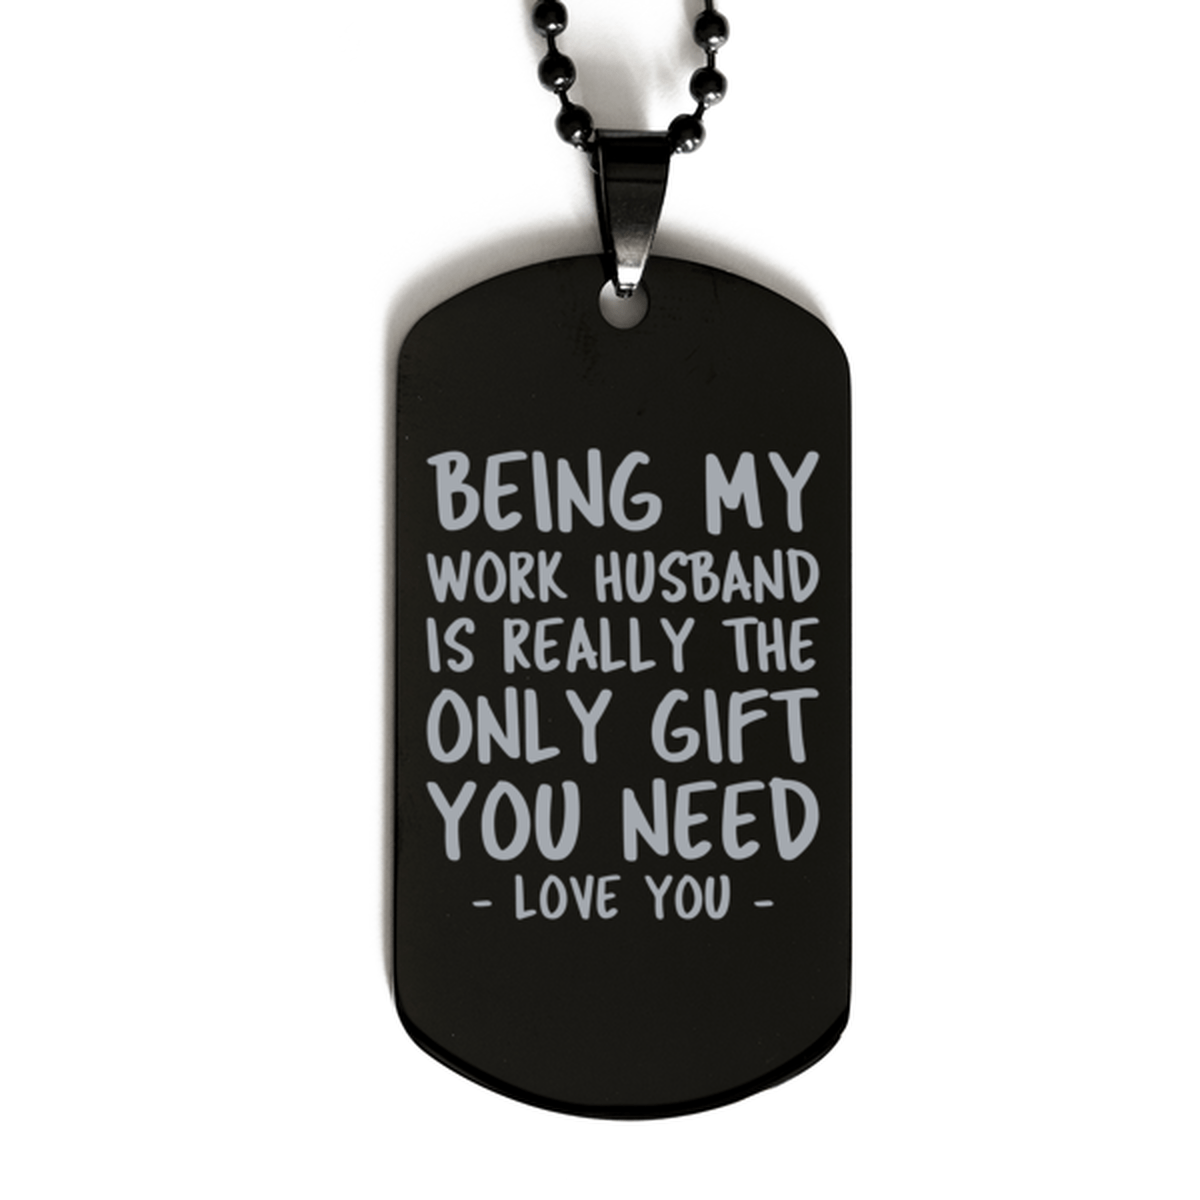 Funny Work Husband Black Dog Tag Necklace, Being My Work Husband Is Really the Only Gift You Need, Best Birthday Gifts for Work Husband